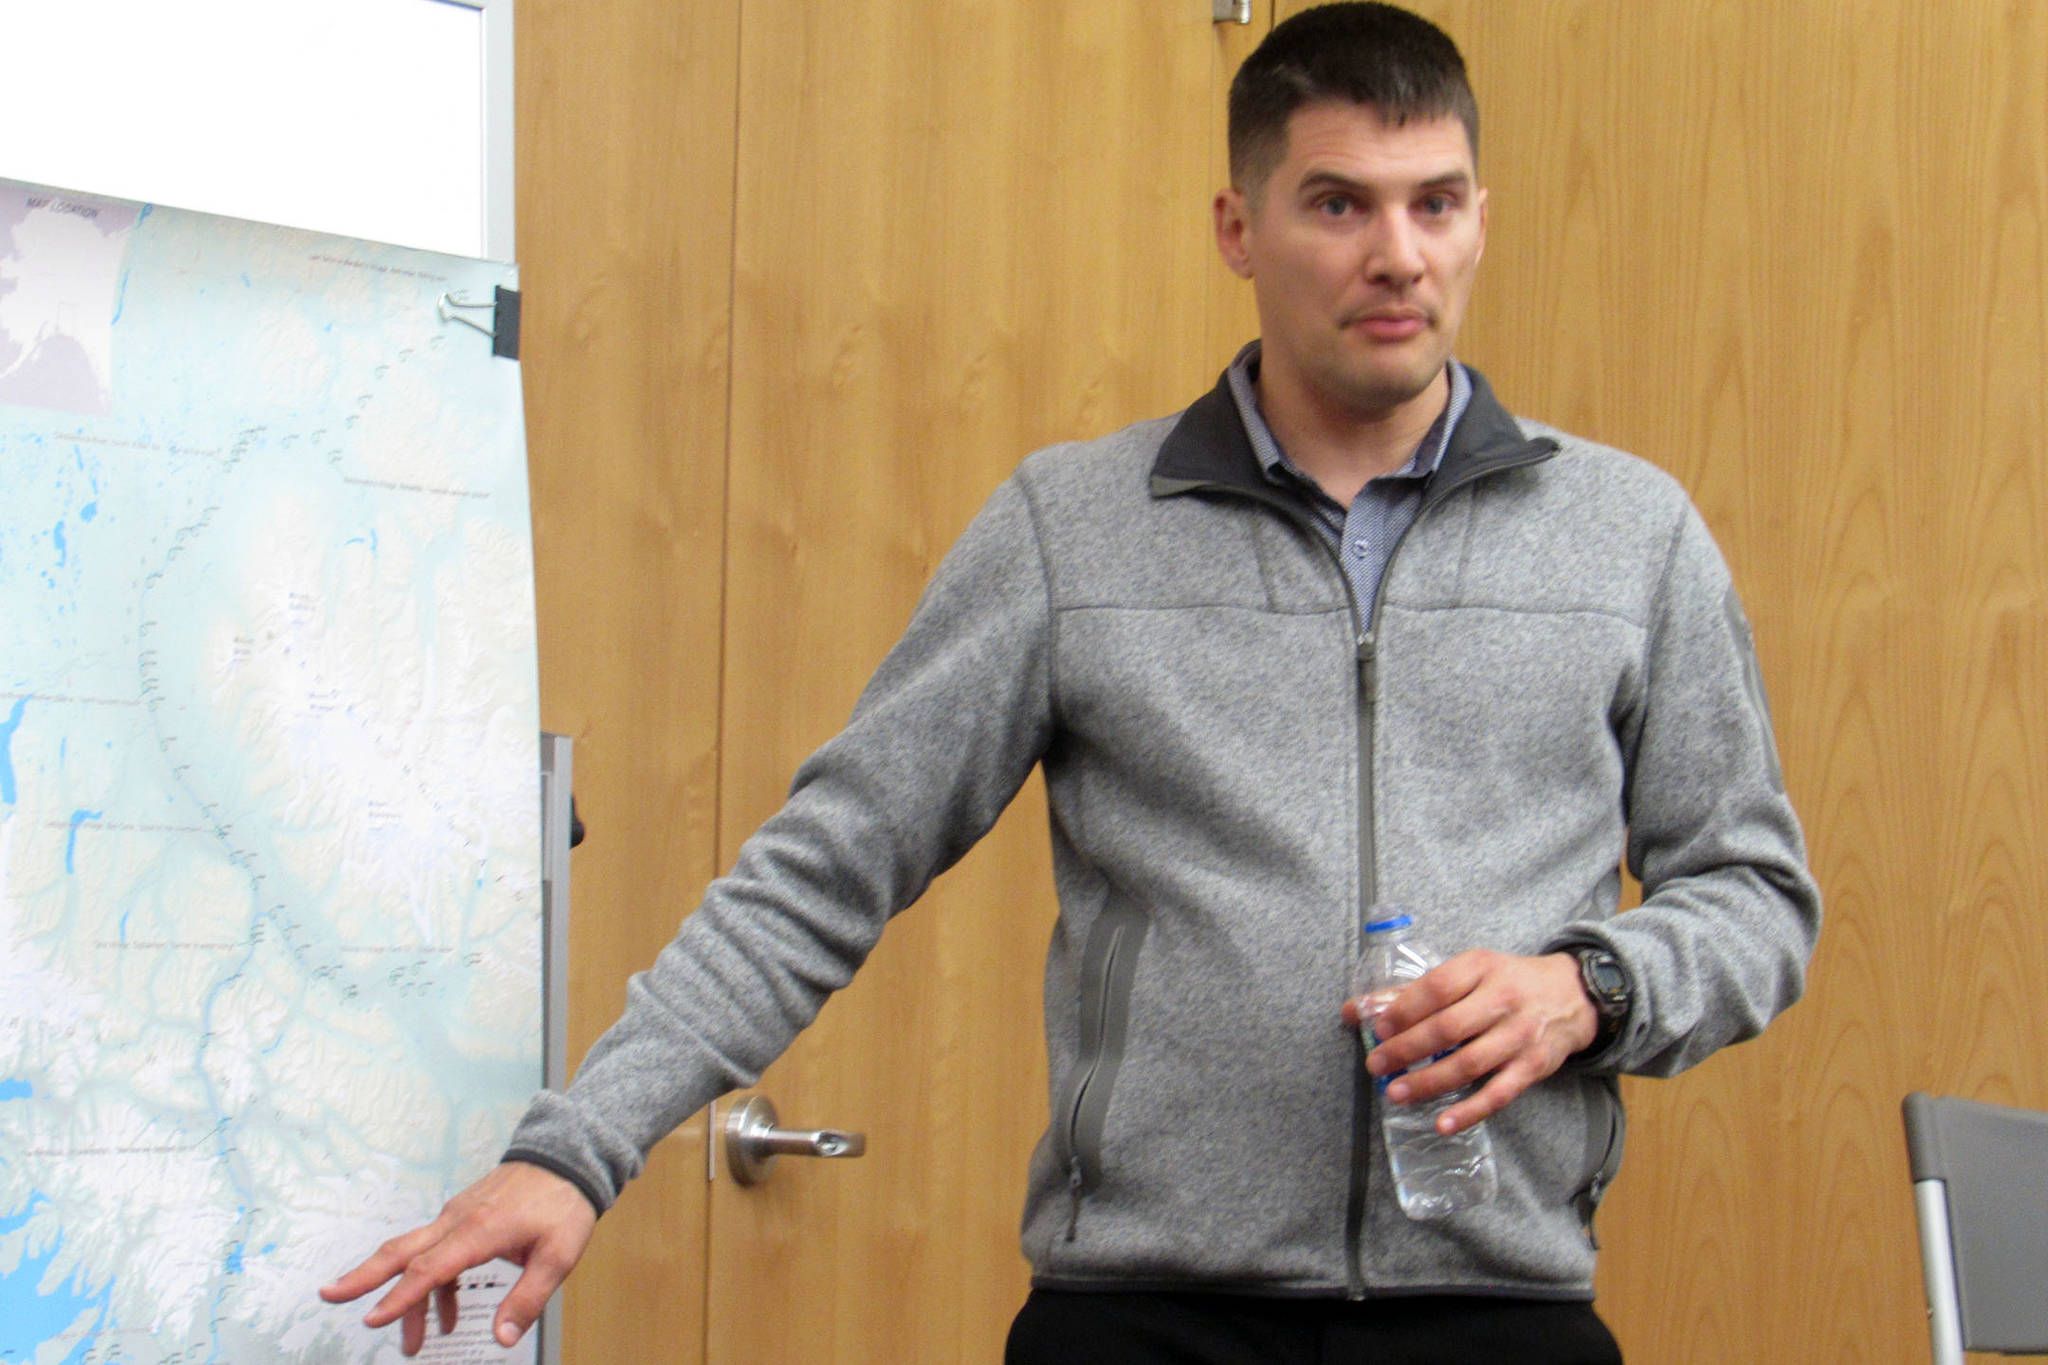 Russ Vander Lugt, a PhD candidate in University of Alaska Fairbanks’ Arctic and Northern Studies program and a Lieutenant Colonel in the Army, speaks about Henry Allen and his 1885 expedition at the Alaska State Library, Archives and Museum, May 16, 2019. (Ben Hohenstatt | Capital City Weekly)